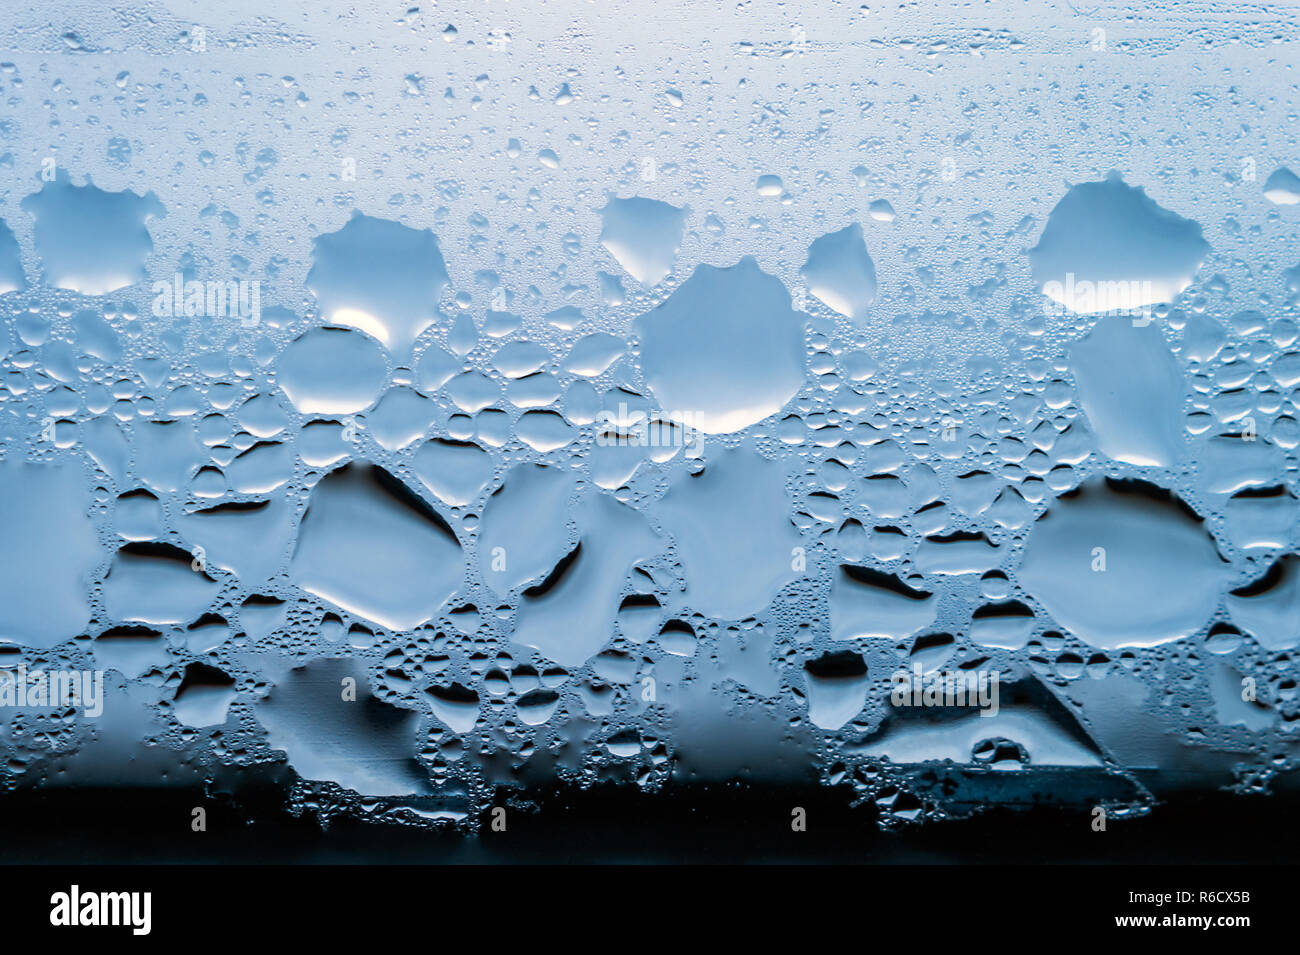 Condensation, Vapor, Rain, Water Drops Of Various Sizes On A Glass Surface. Stock Photo